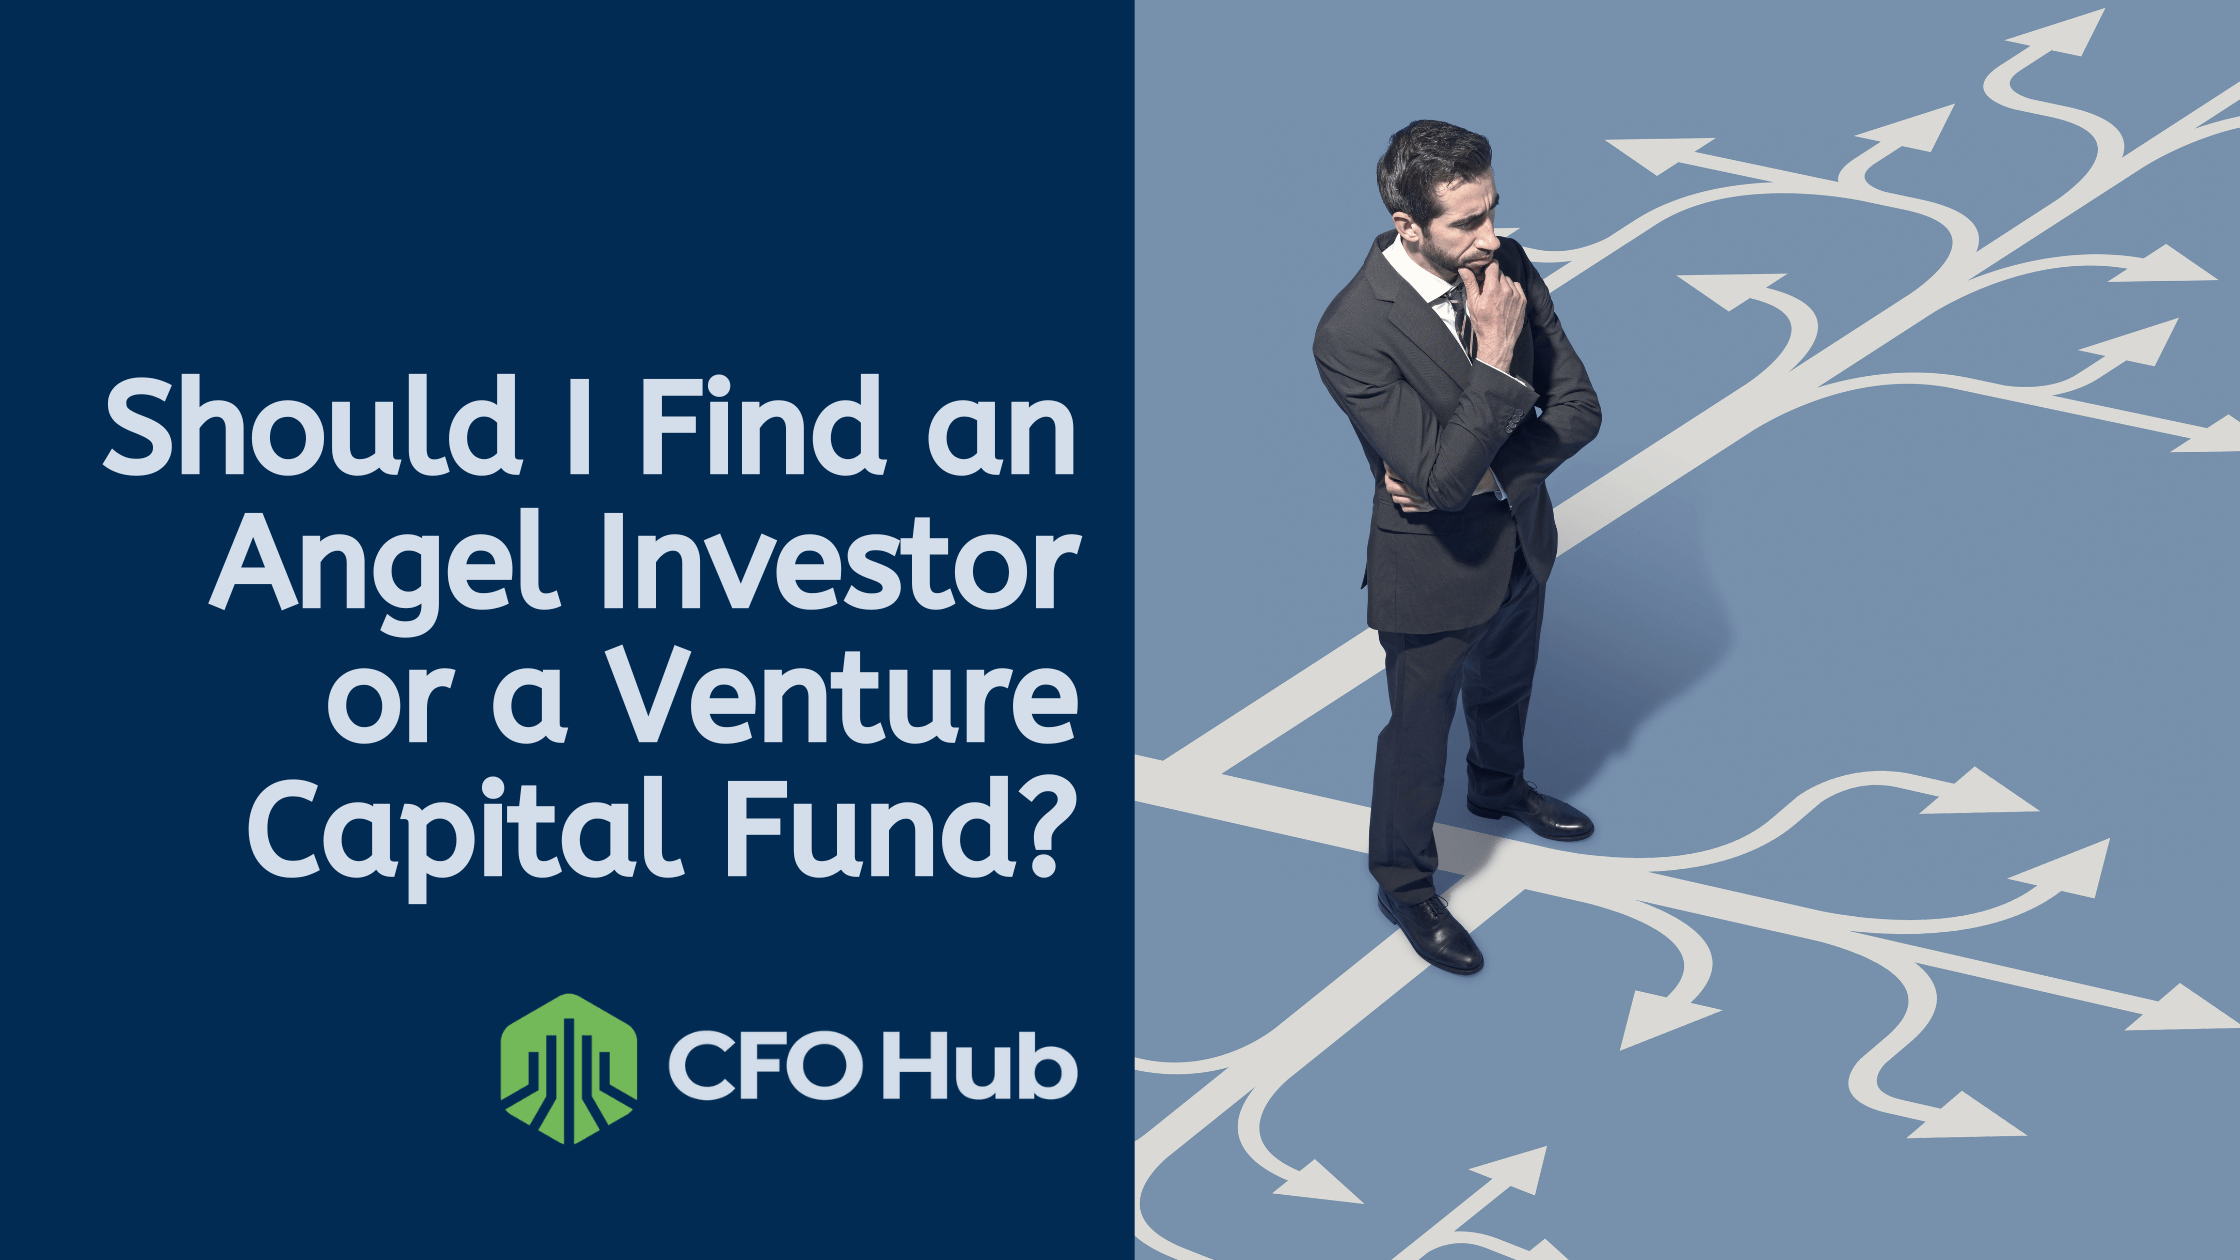 A business professional stands thoughtfully in front of multiple branching paths on a blue floor. The text reads, "Should I Find an Angel Investor or a Venture Capital Fund?" The bottom left corner displays the CFO Hub logo.